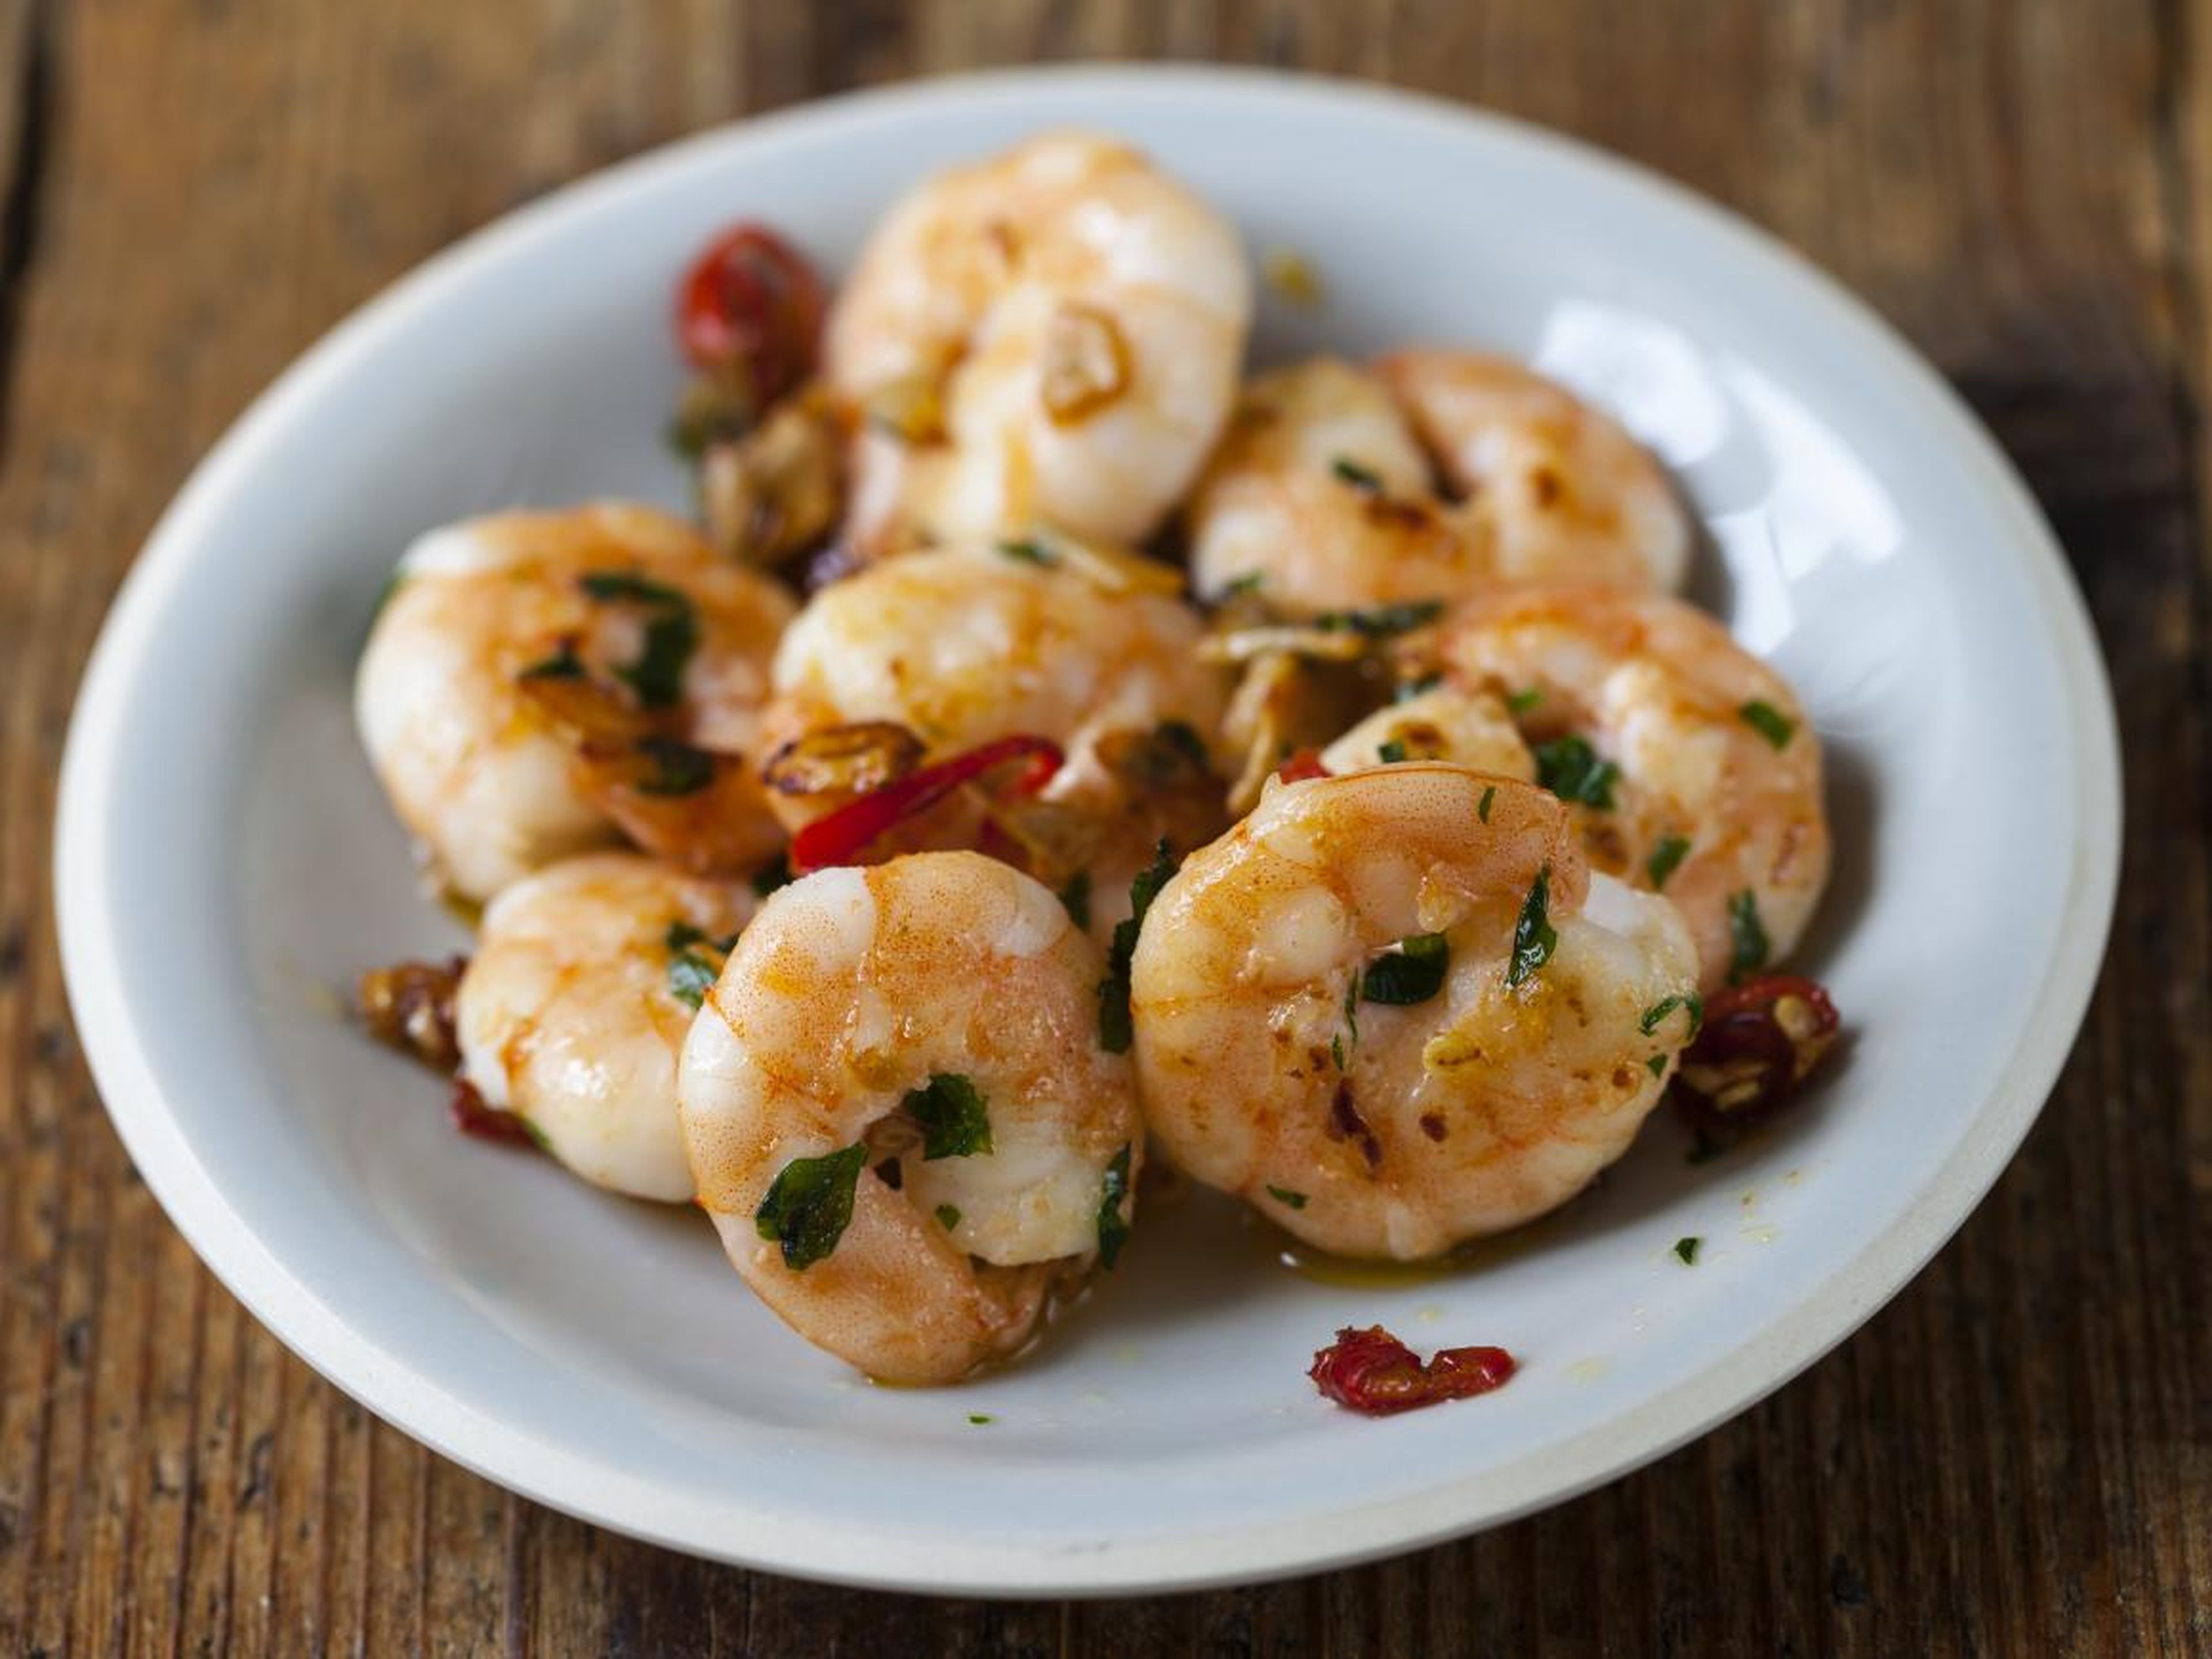 Unless you want rubbery shrimp, avoid microwaving it.